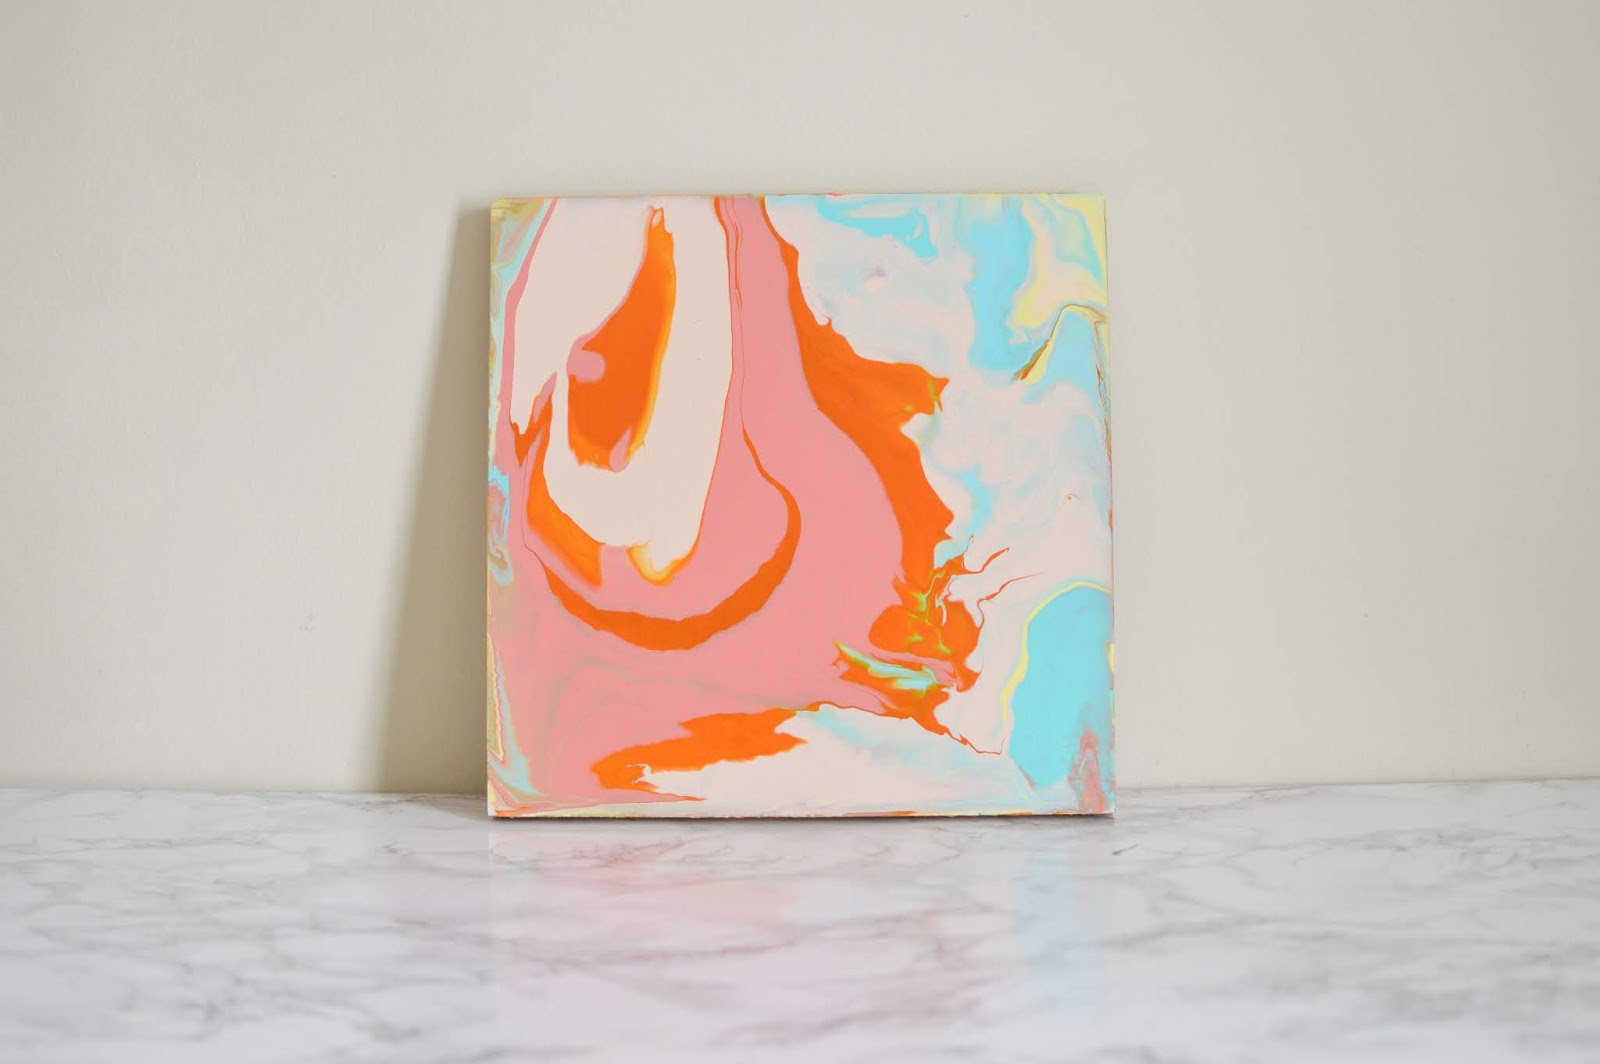 Art Room Blog: Acrylic Pour Painting